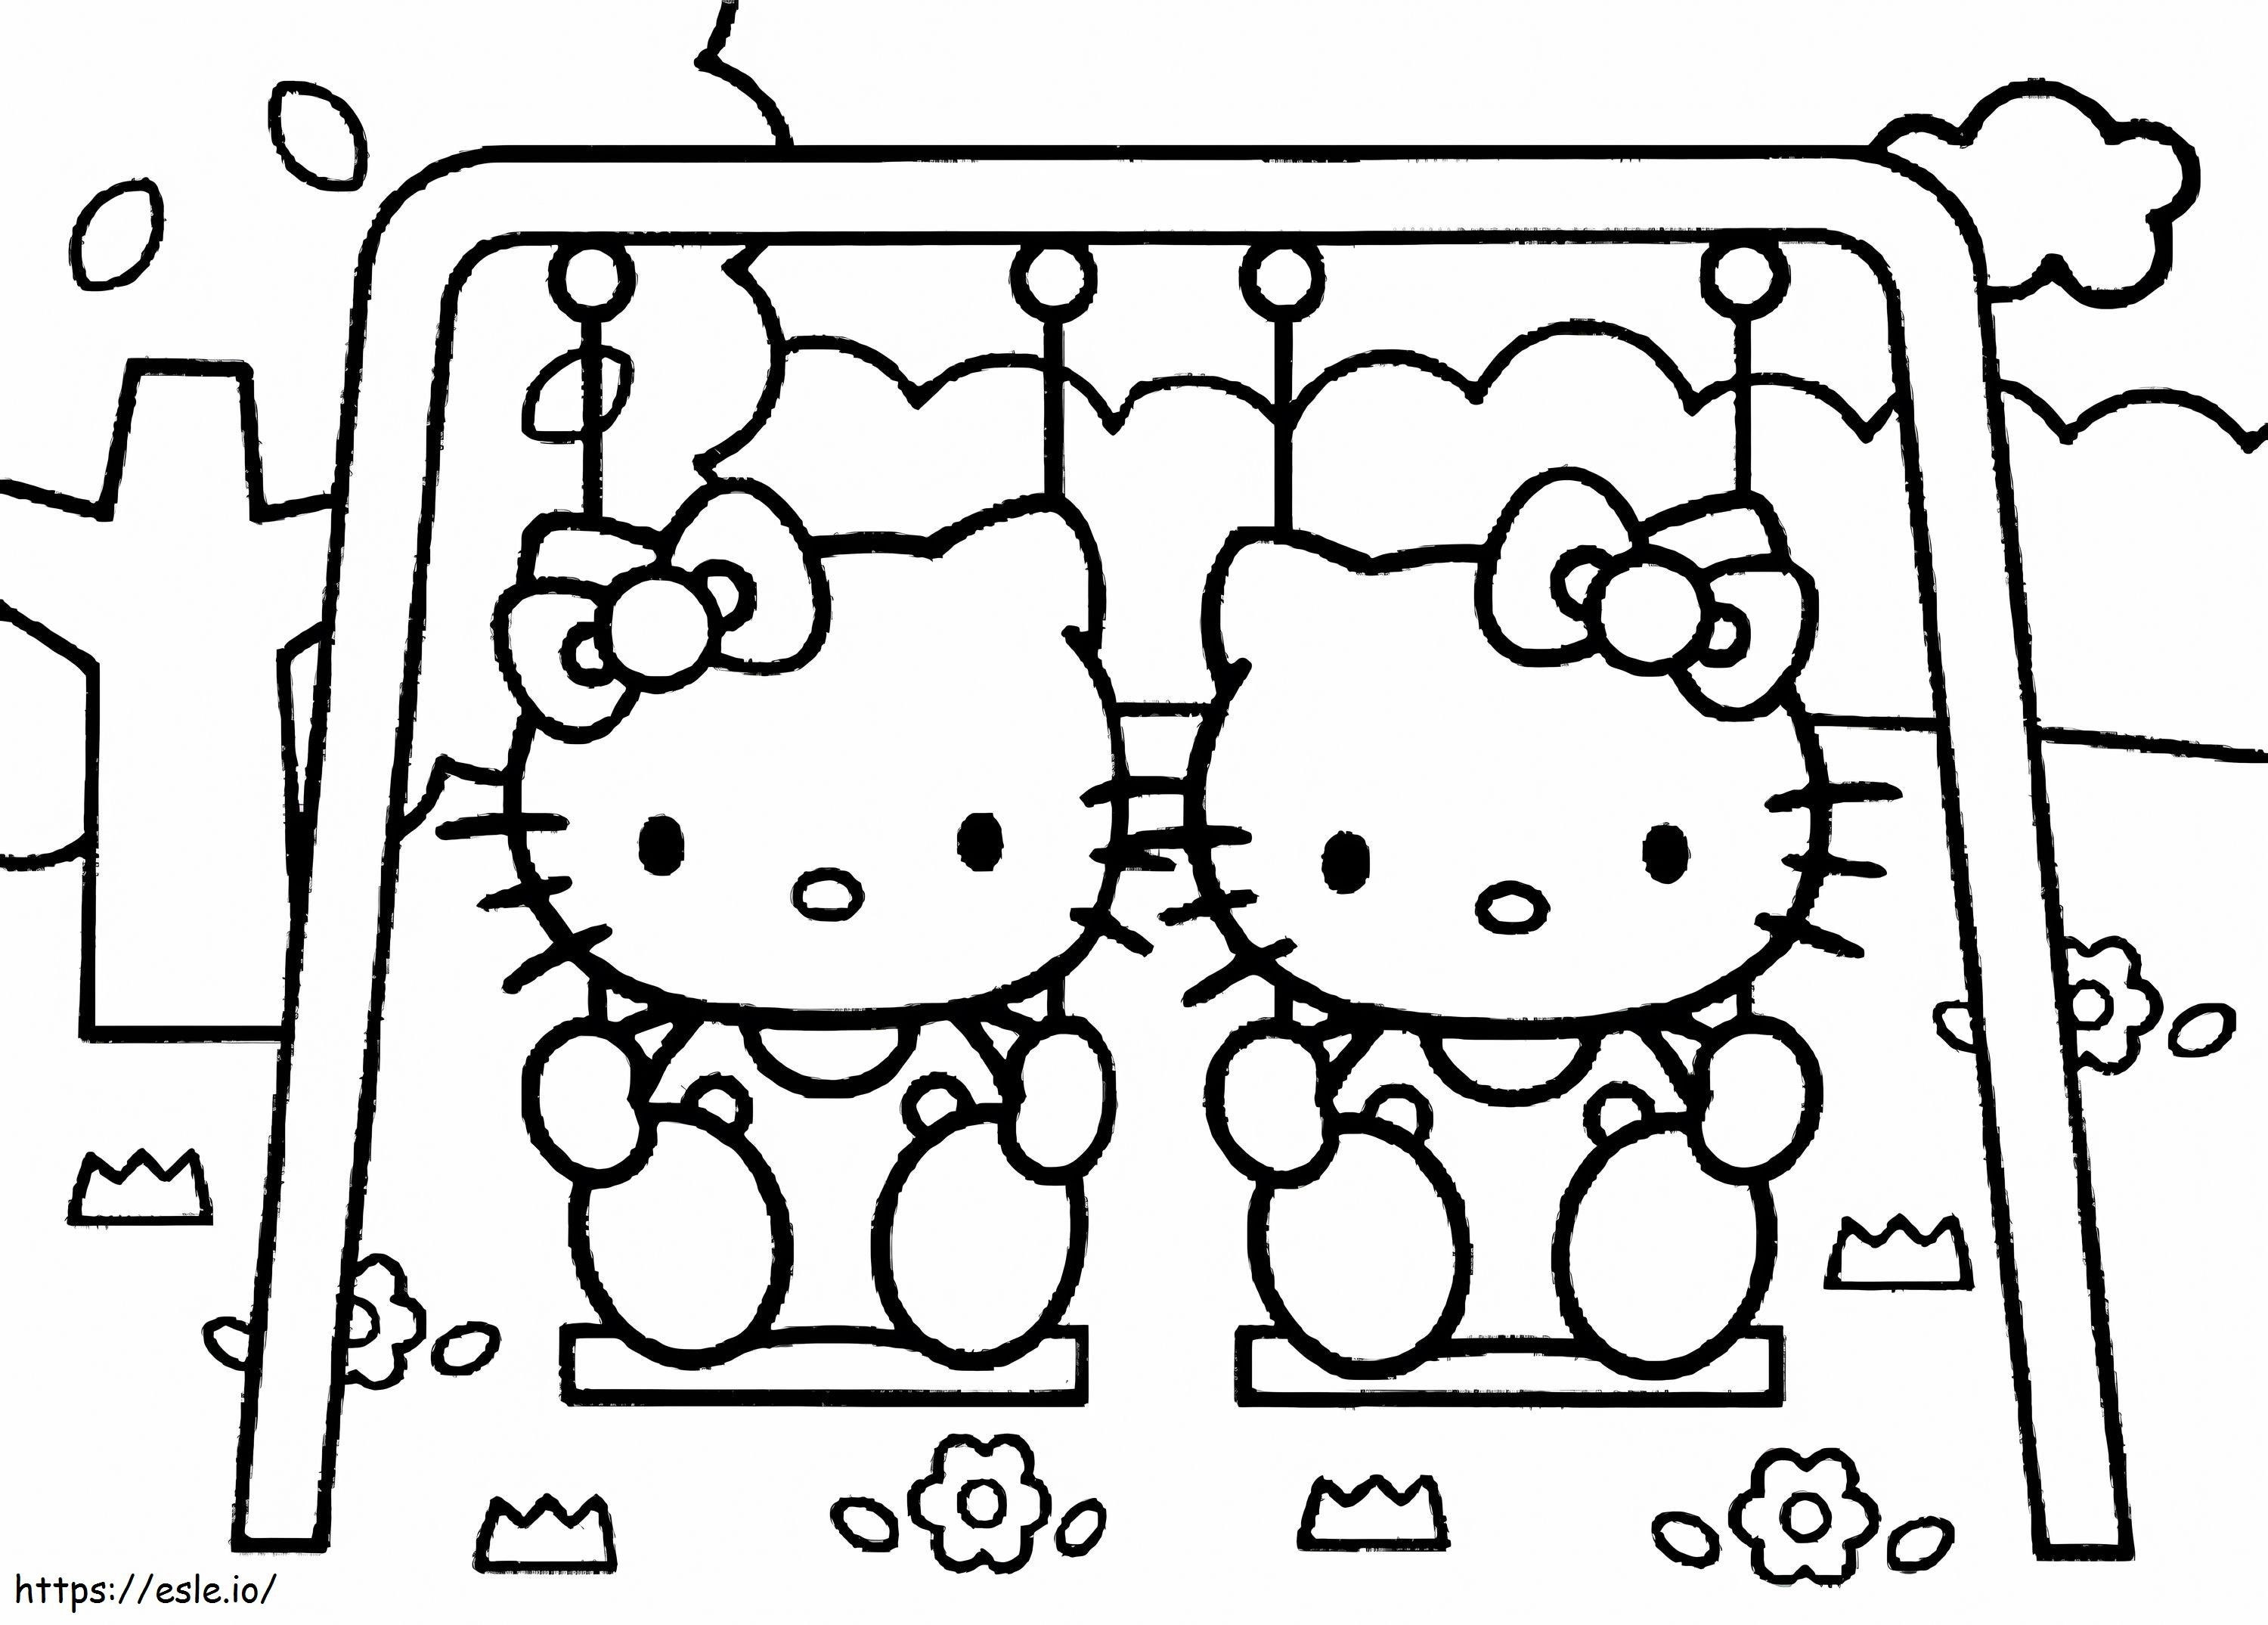 Two Little Hello Kitty Playing Ferris Wheel coloring page